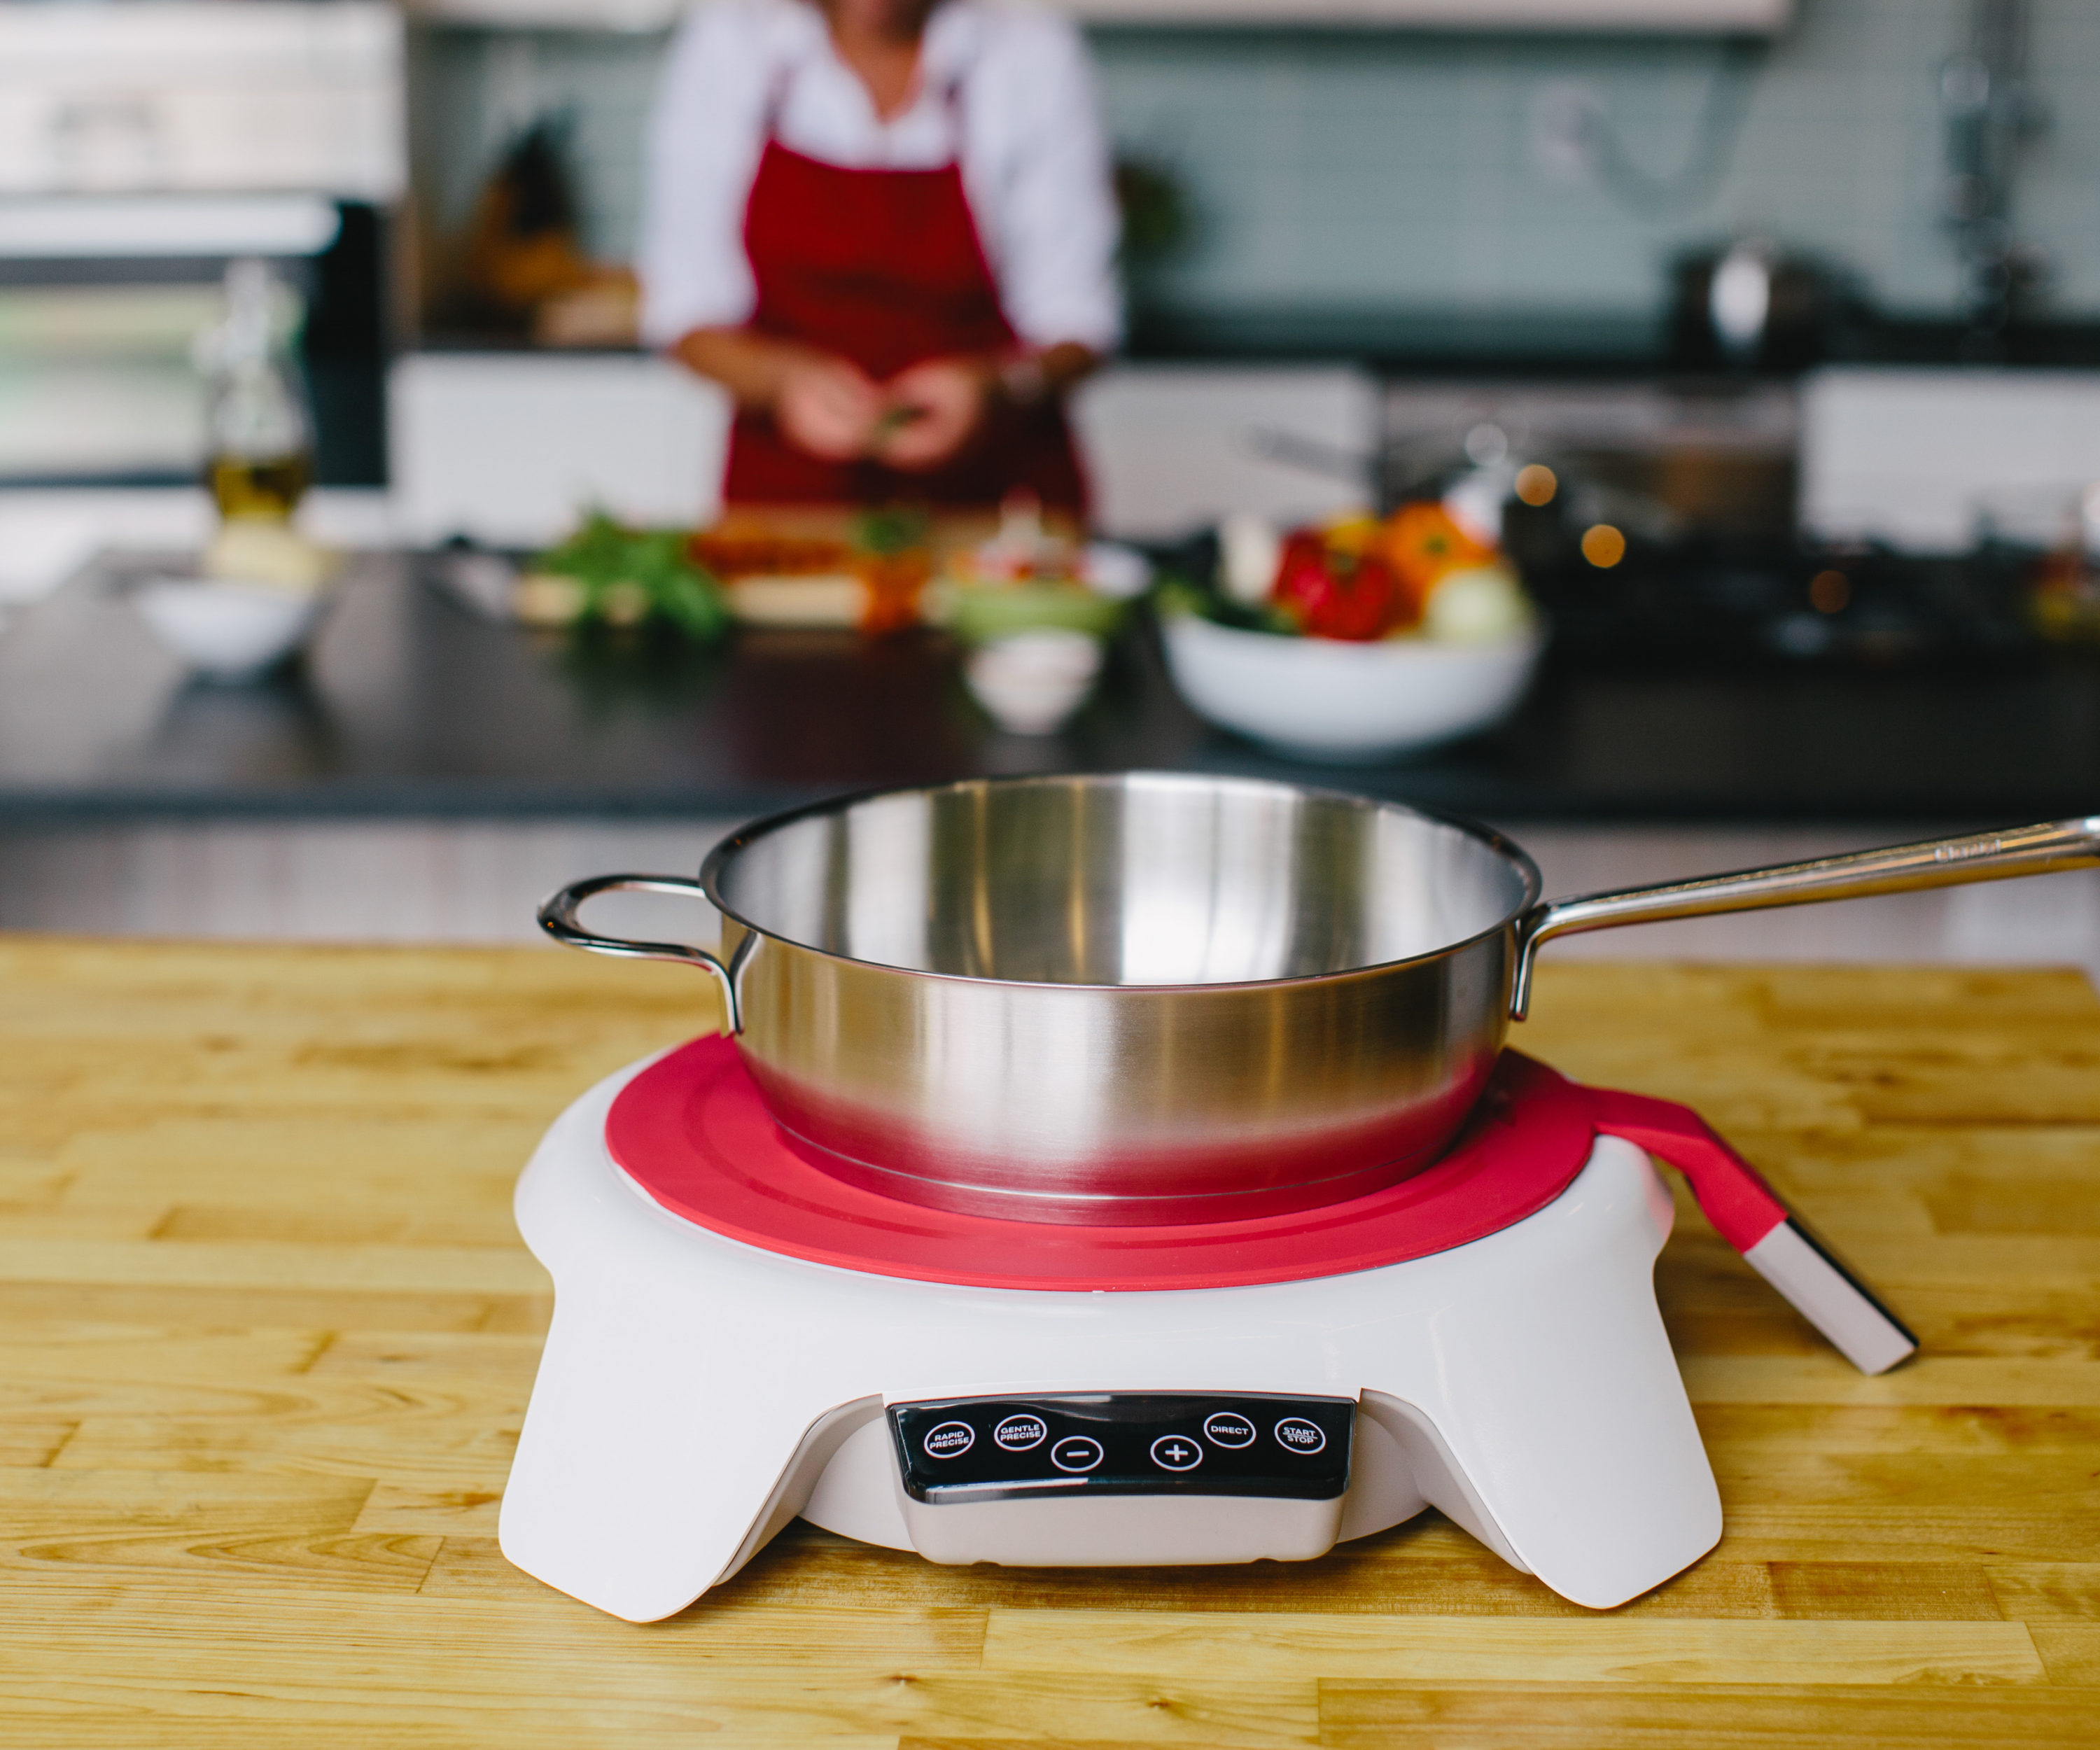 The Paragron Smart Cooking System